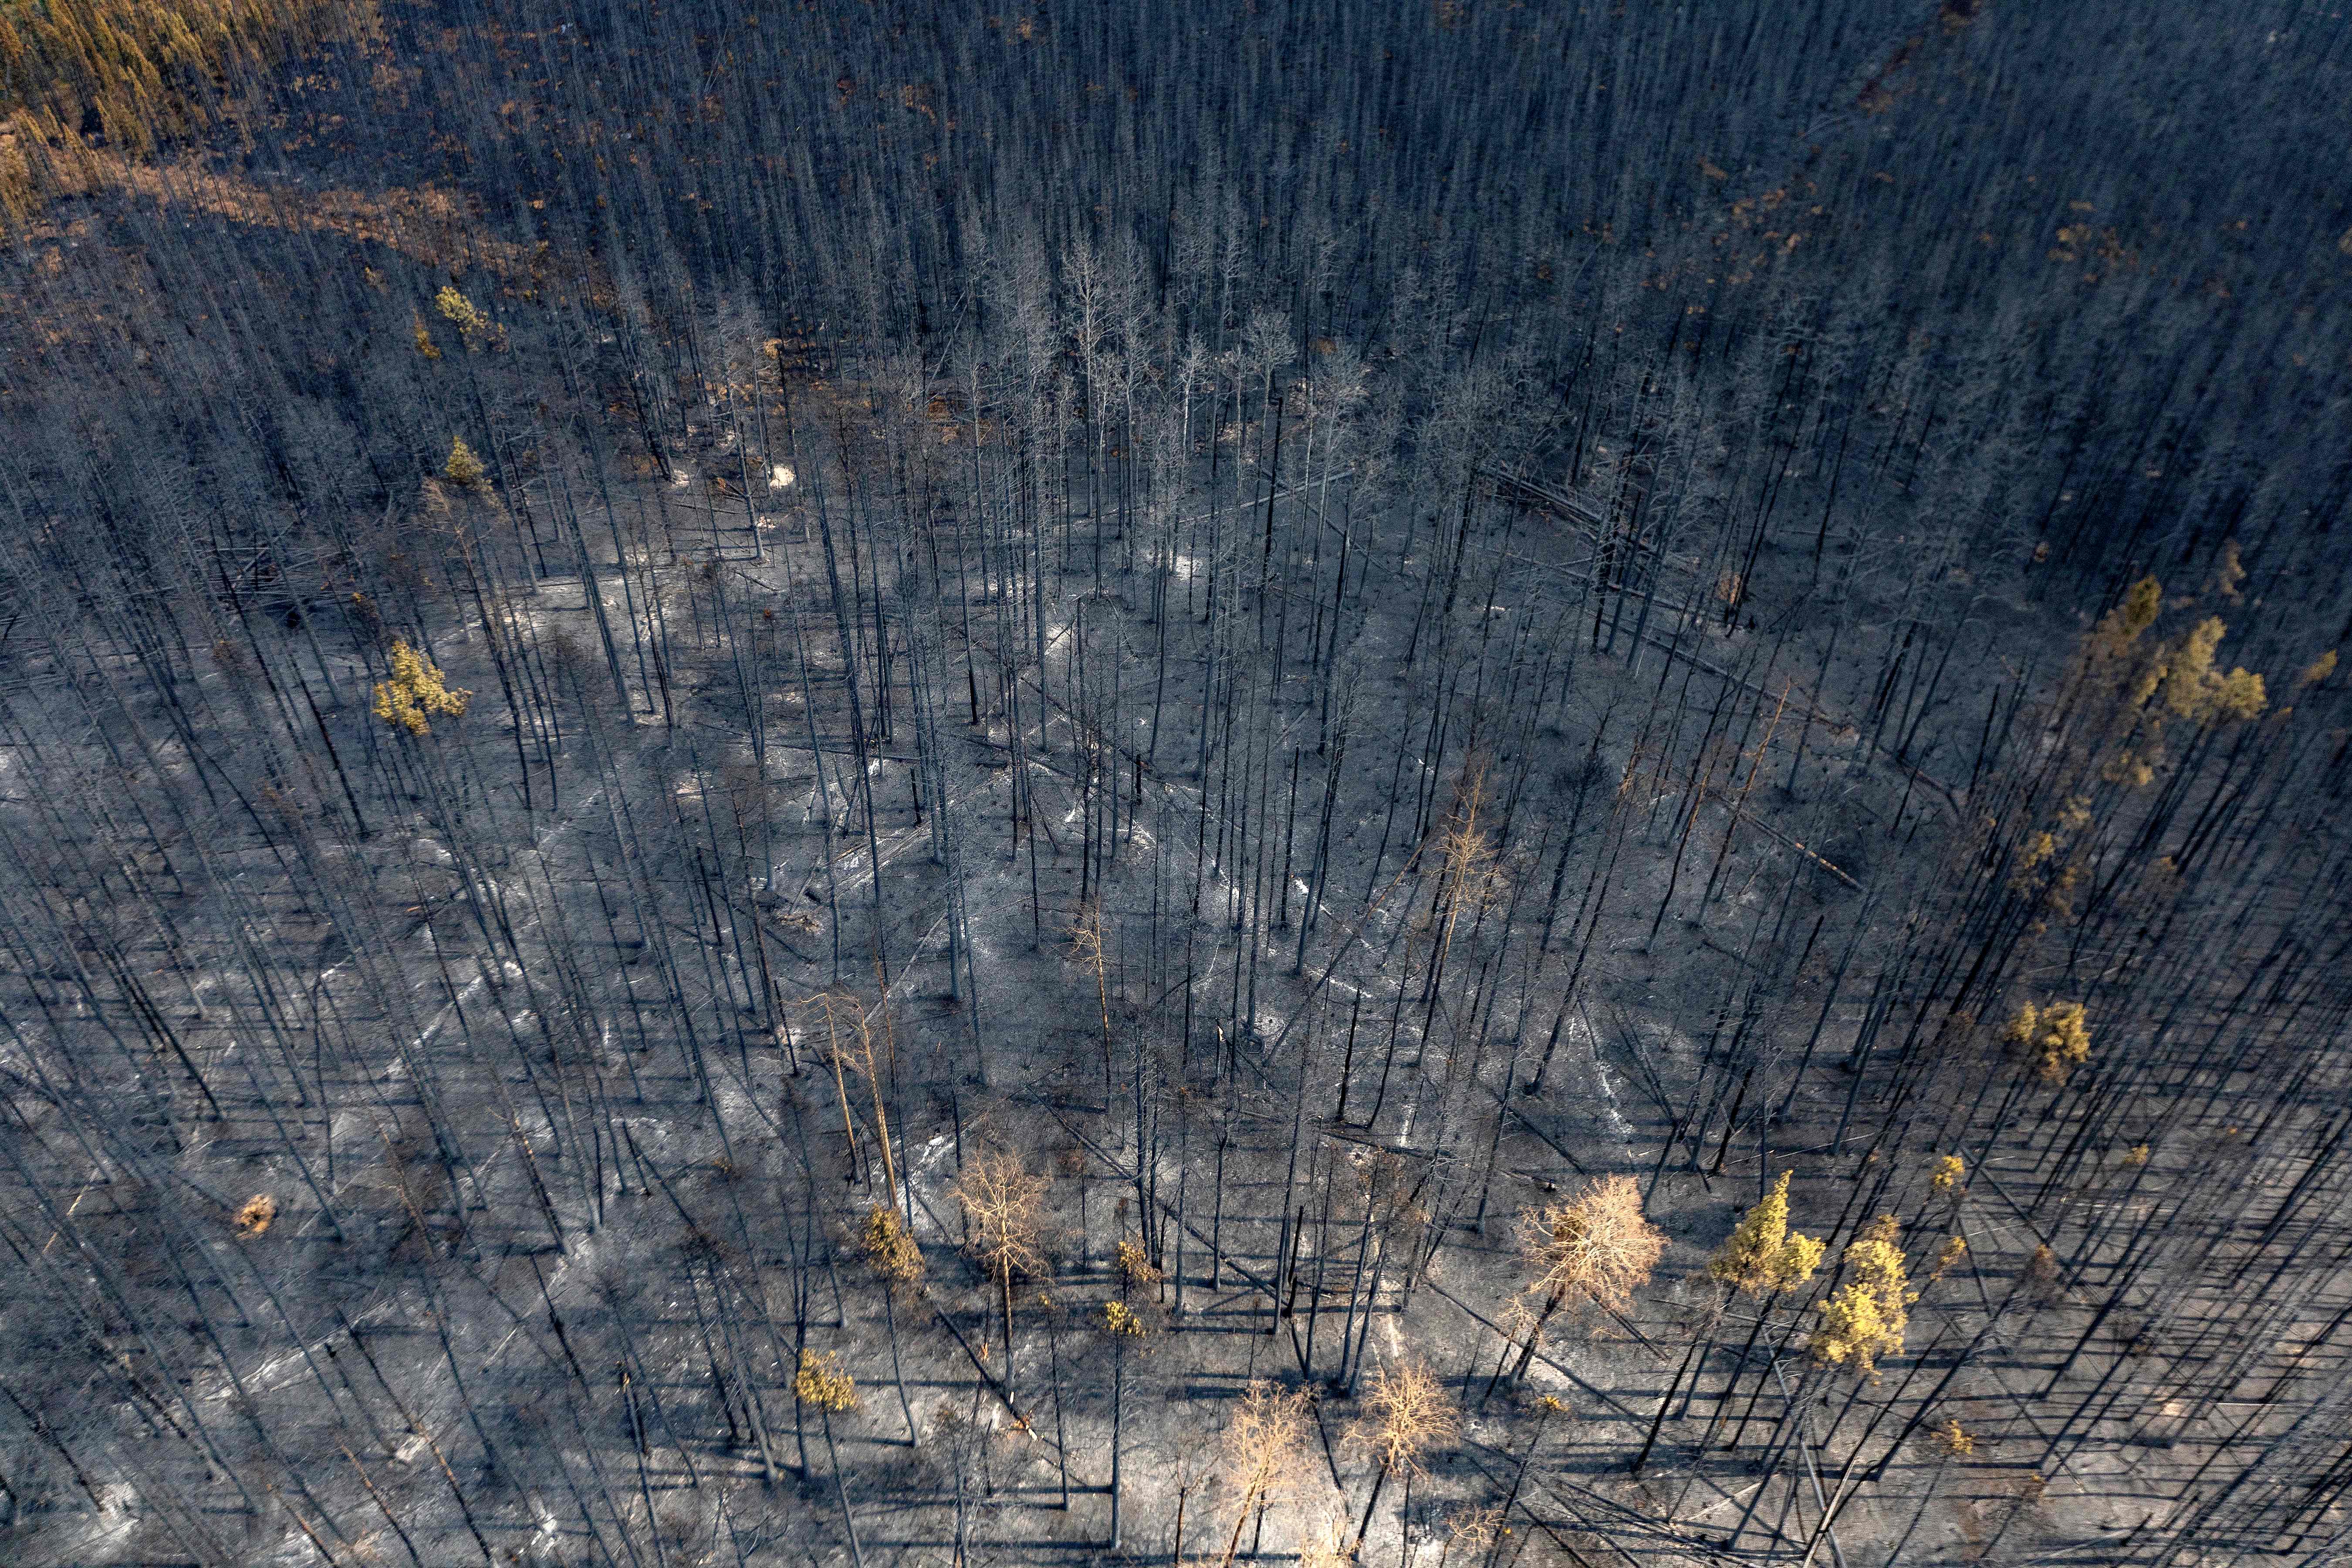 A burnt landscape caused by wildfires is pictured near Entrance, Wild Hay area, Alberta, Canada